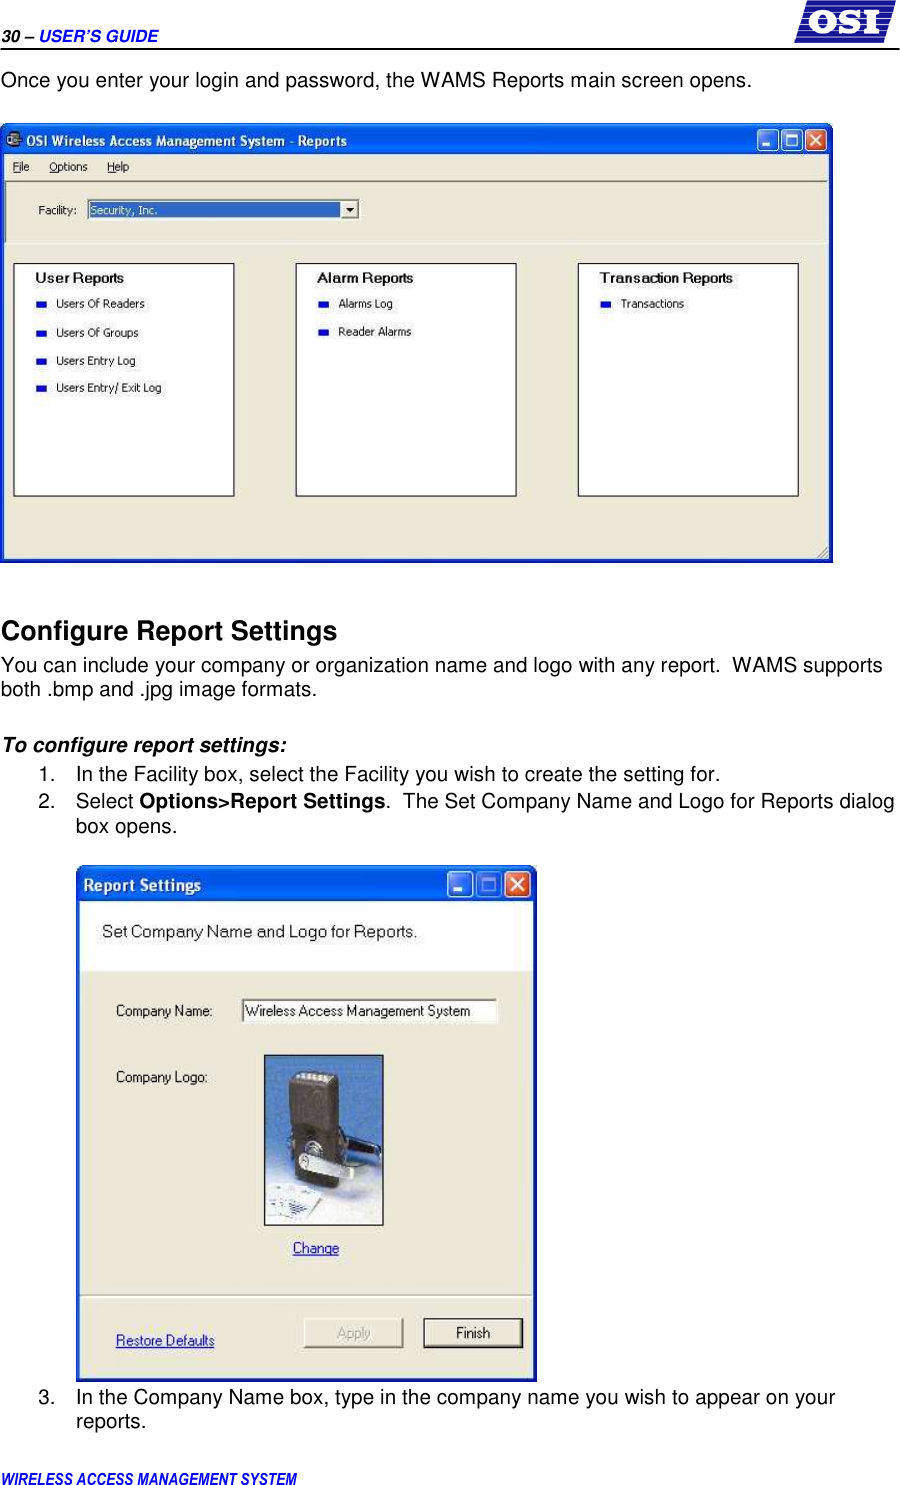 30 – USER’S GUIDE      WIRELESS ACCESS MANAGEMENT SYSTEM Once you enter your login and password, the WAMS Reports main screen opens.    Configure Report Settings You can include your company or organization name and logo with any report.  WAMS supports both .bmp and .jpg image formats.  To configure report settings: 1.  In the Facility box, select the Facility you wish to create the setting for. 2.  Select Options&gt;Report Settings.  The Set Company Name and Logo for Reports dialog box opens.   3.  In the Company Name box, type in the company name you wish to appear on your reports. 